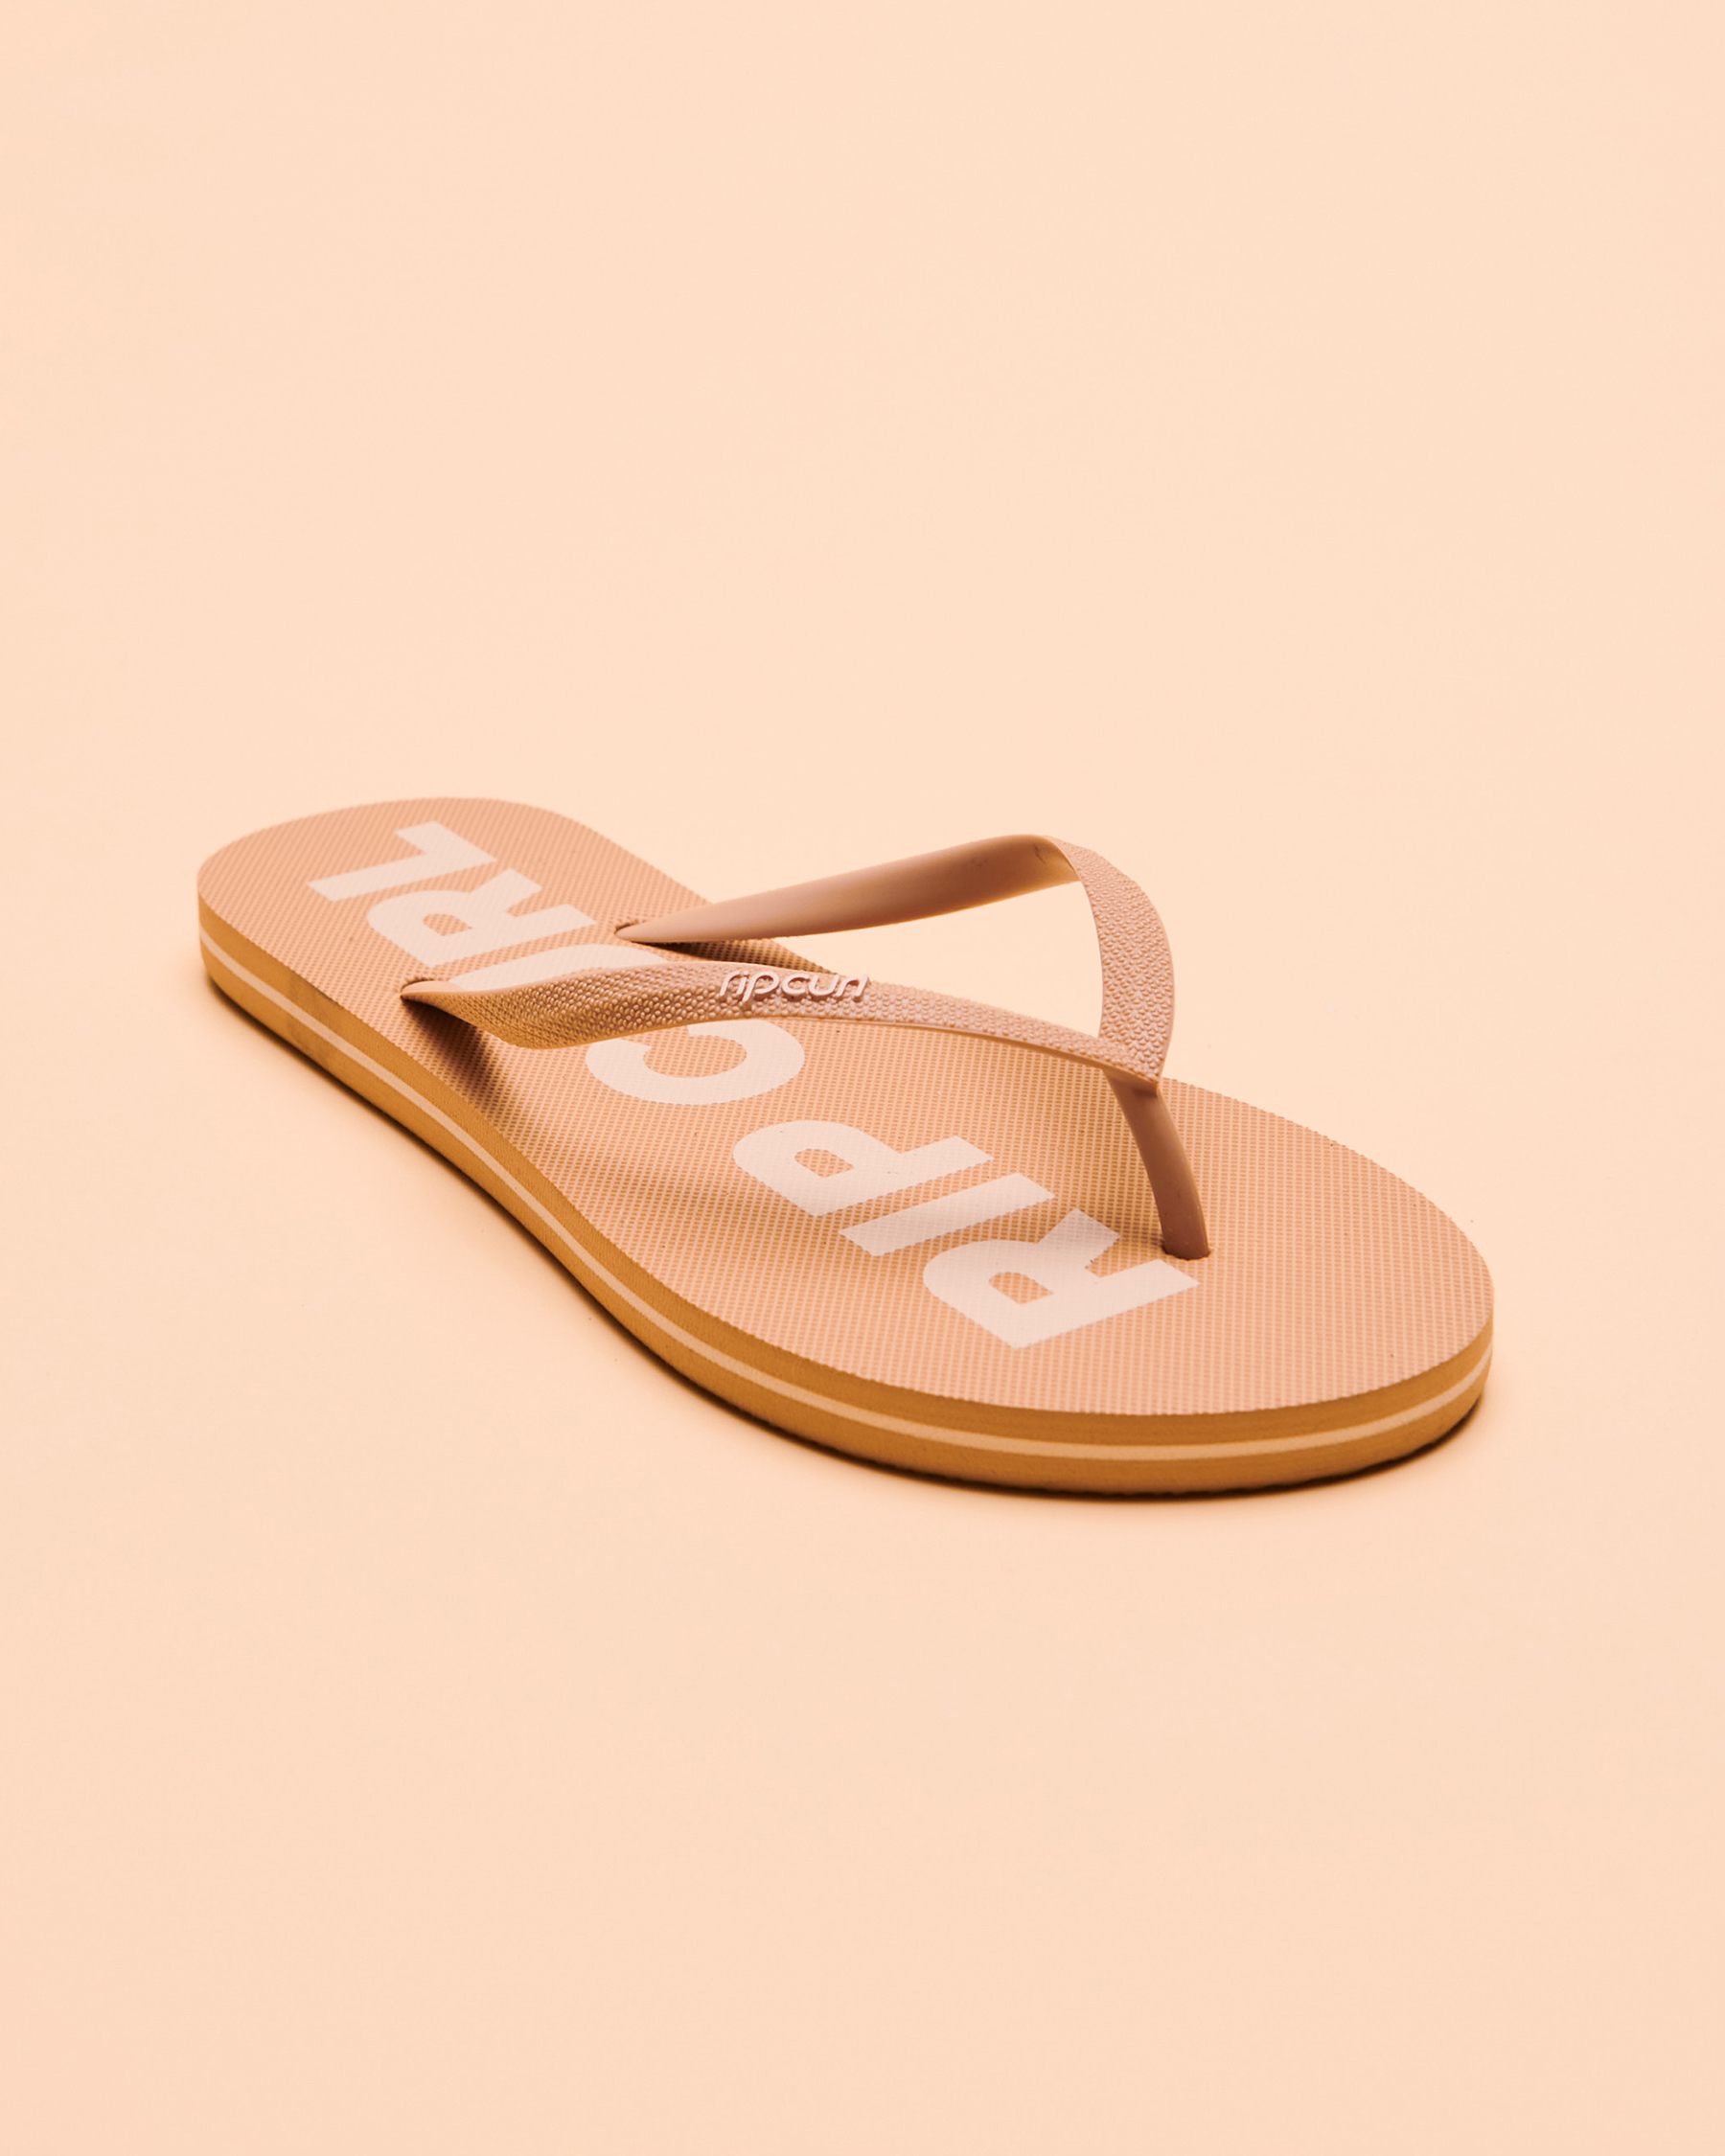 RIP CURL CLASSIC SURF Sandals Sand 158WOT - View4